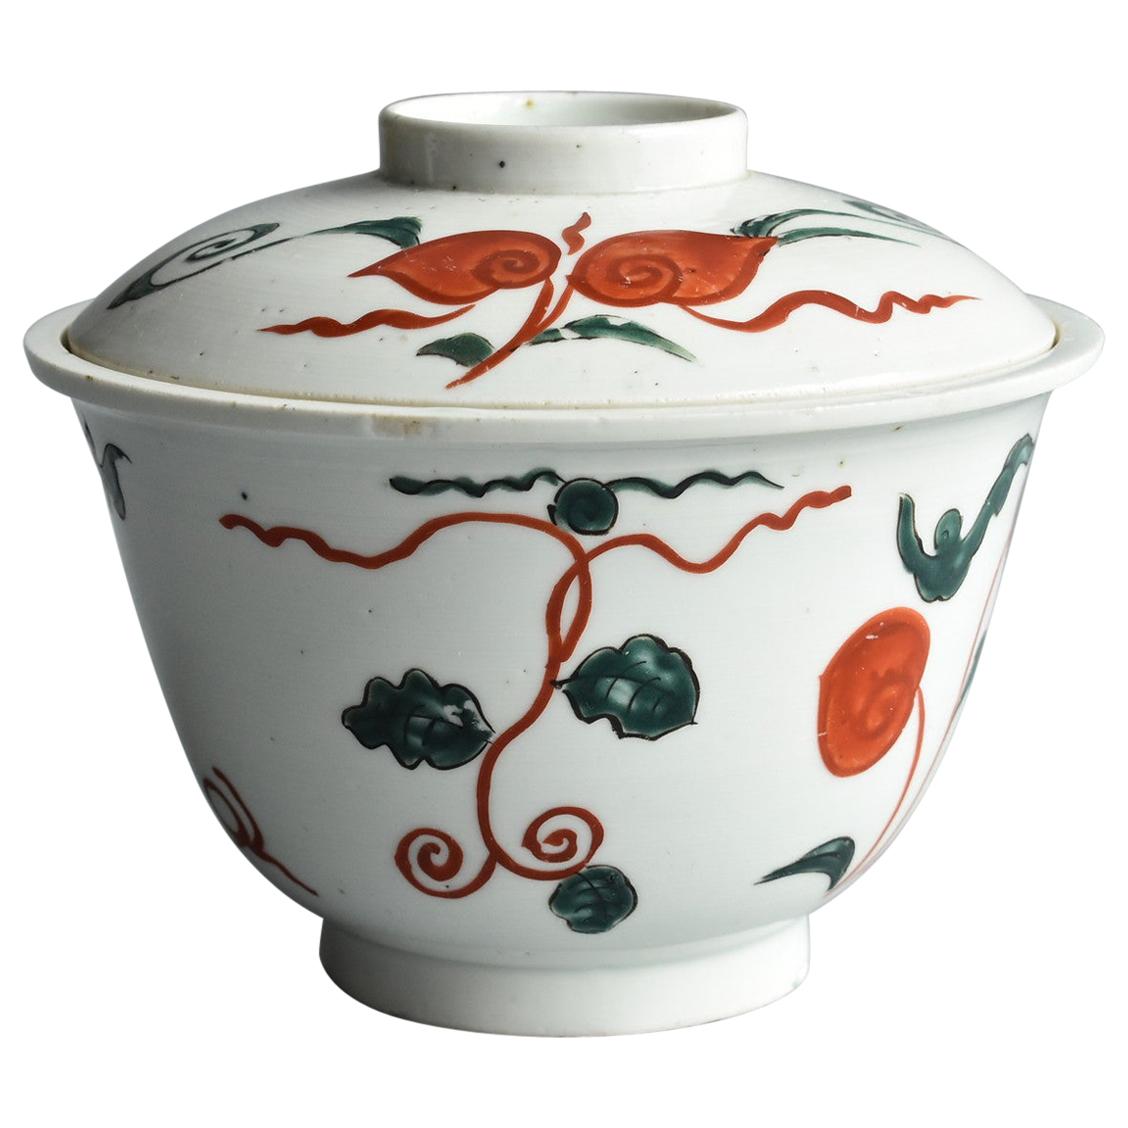 Qing Dynasty, Chinese Antique Porcelain / Rice Bowl with Lid, 19th Century